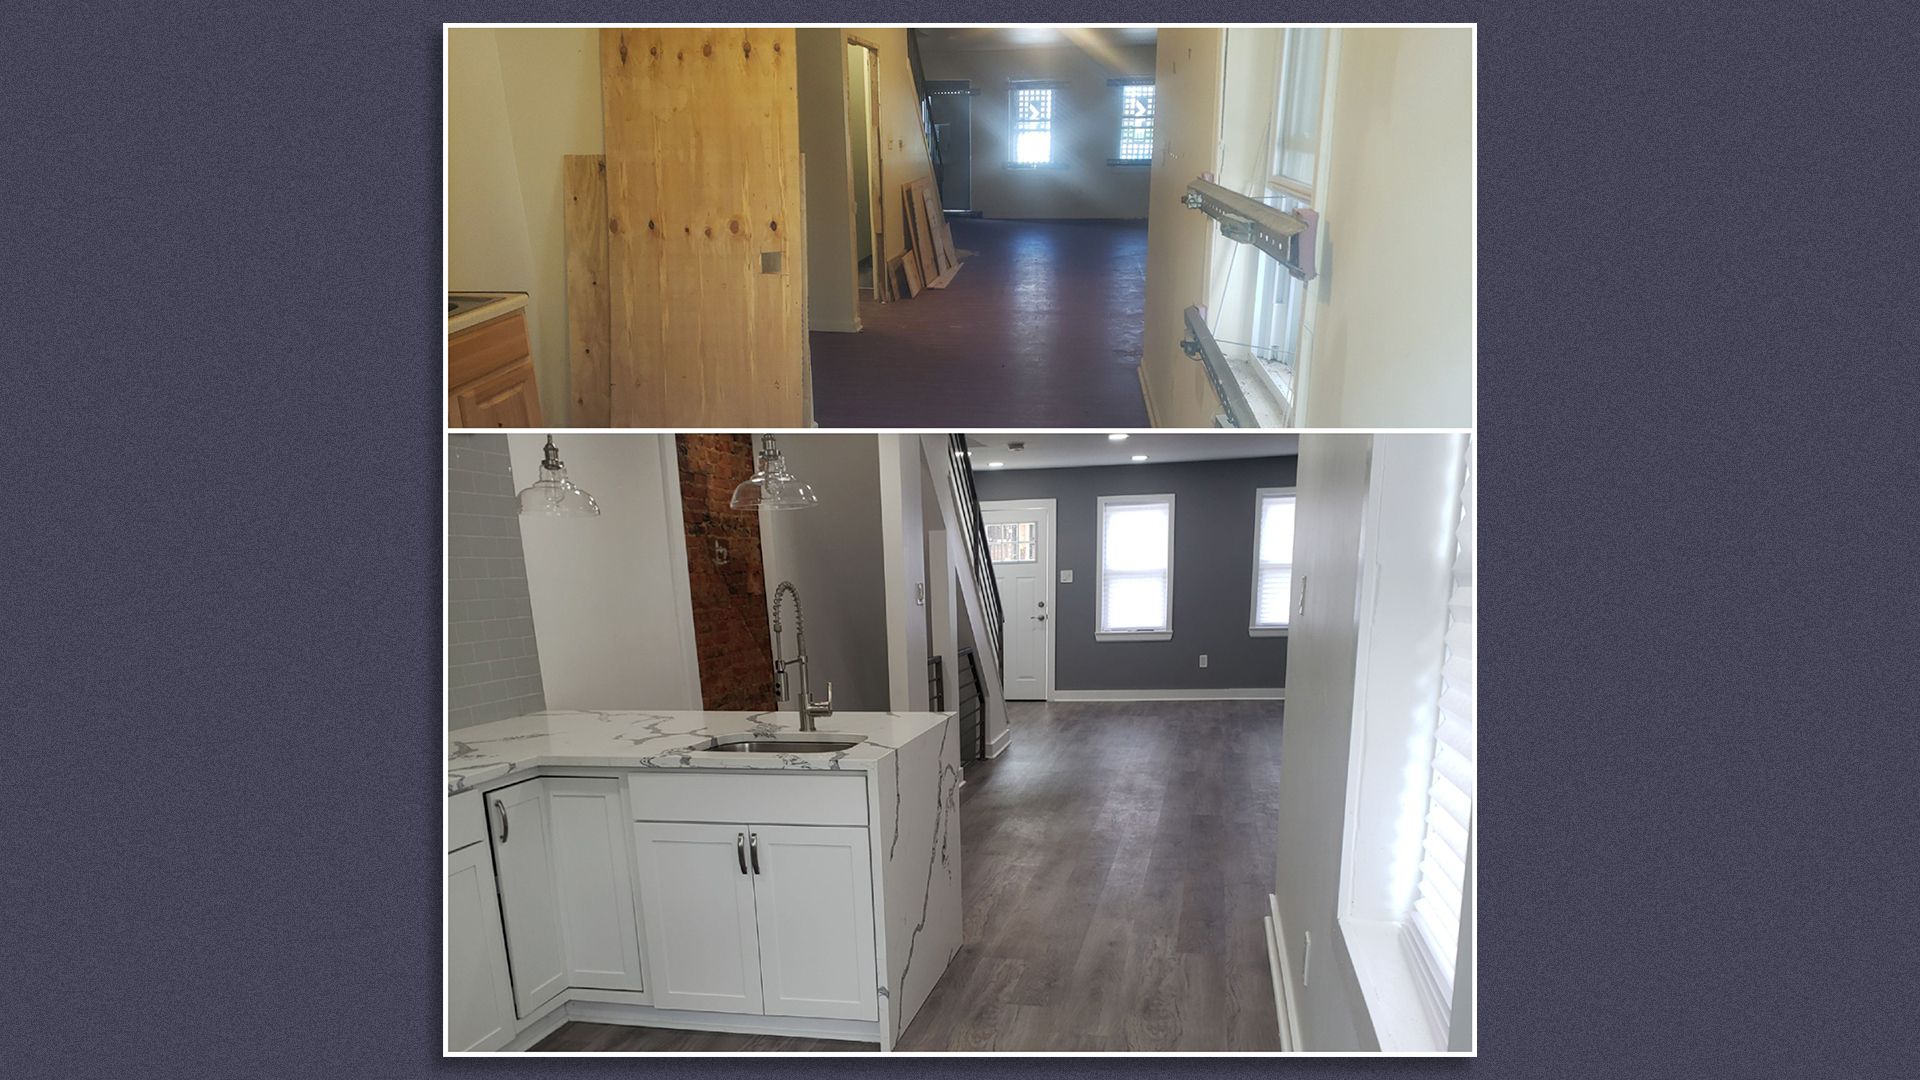 A before and after of the kitchen and living room of Zaire Potts' first development project in West Philly. Photo courtesy of Zaire Potts